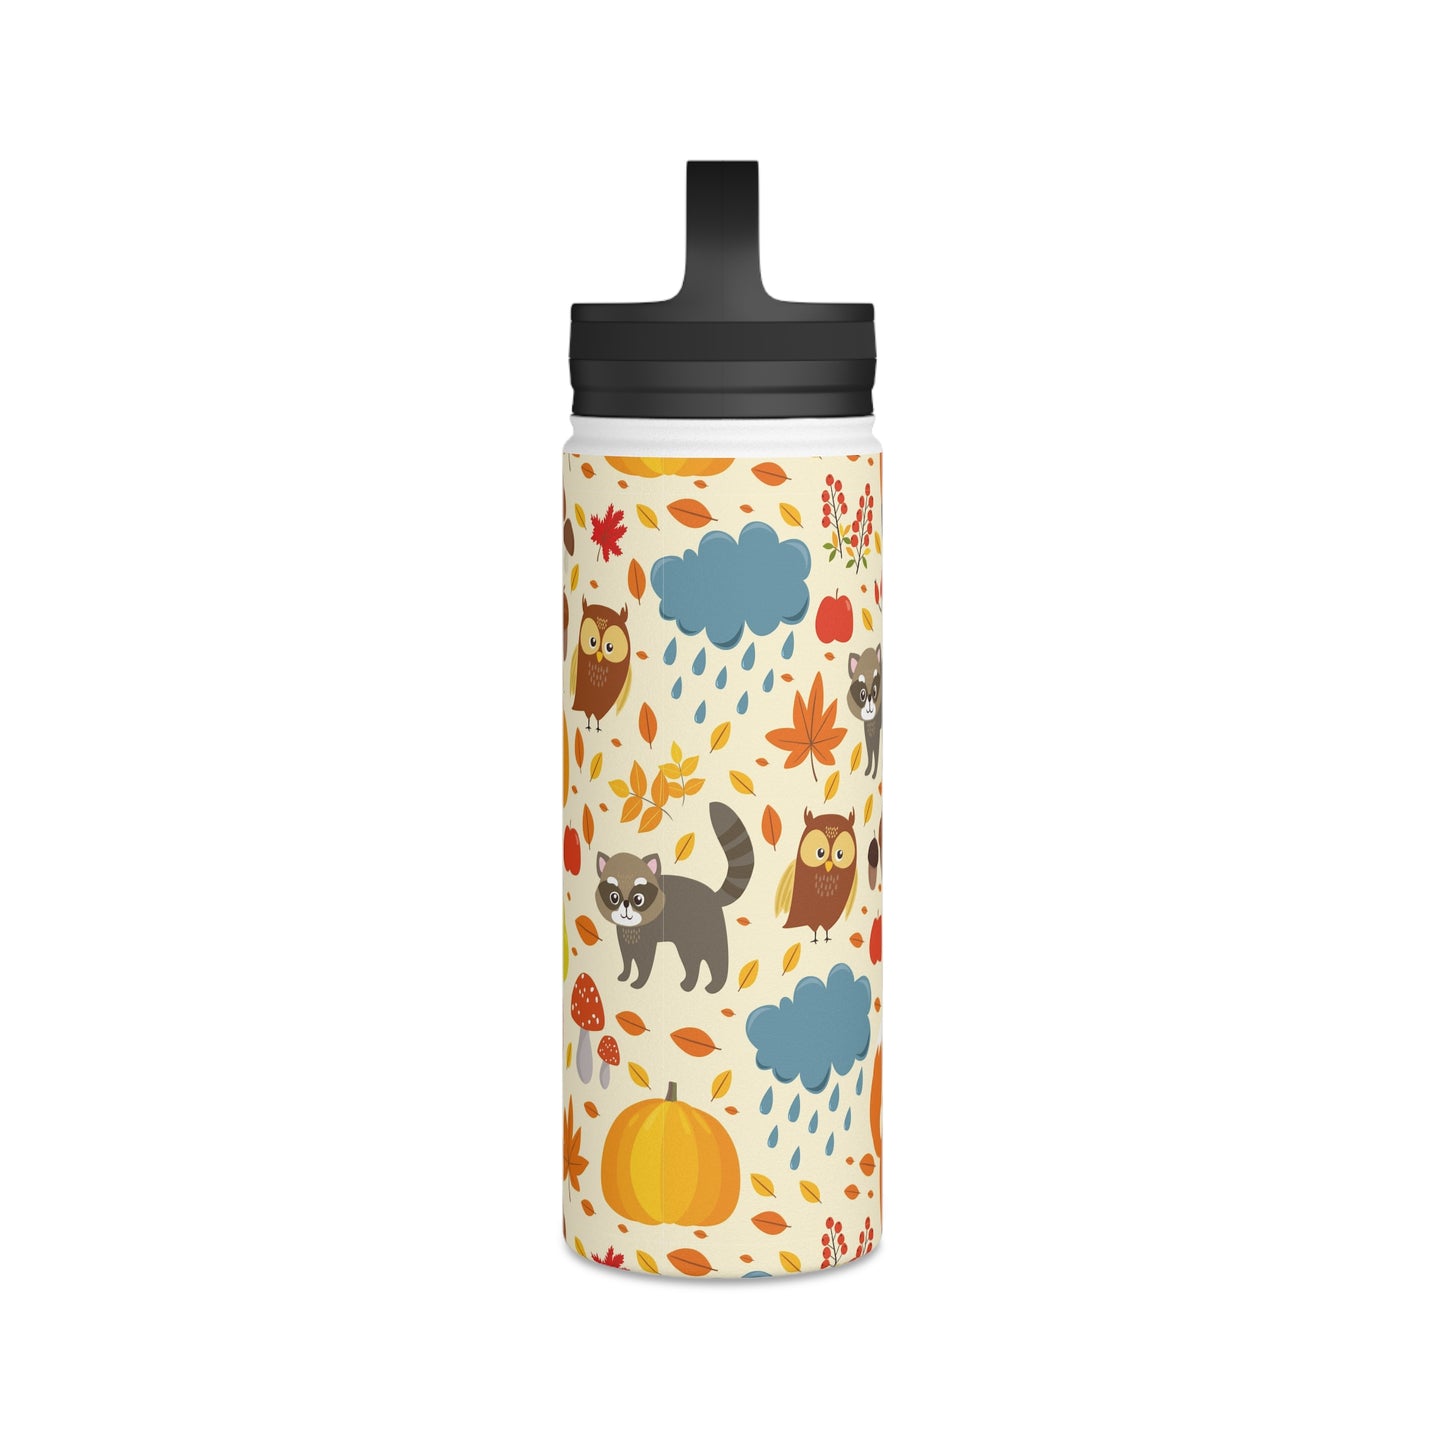 Back To School Animals Stainless Steel Water Bottle, Handle Lid